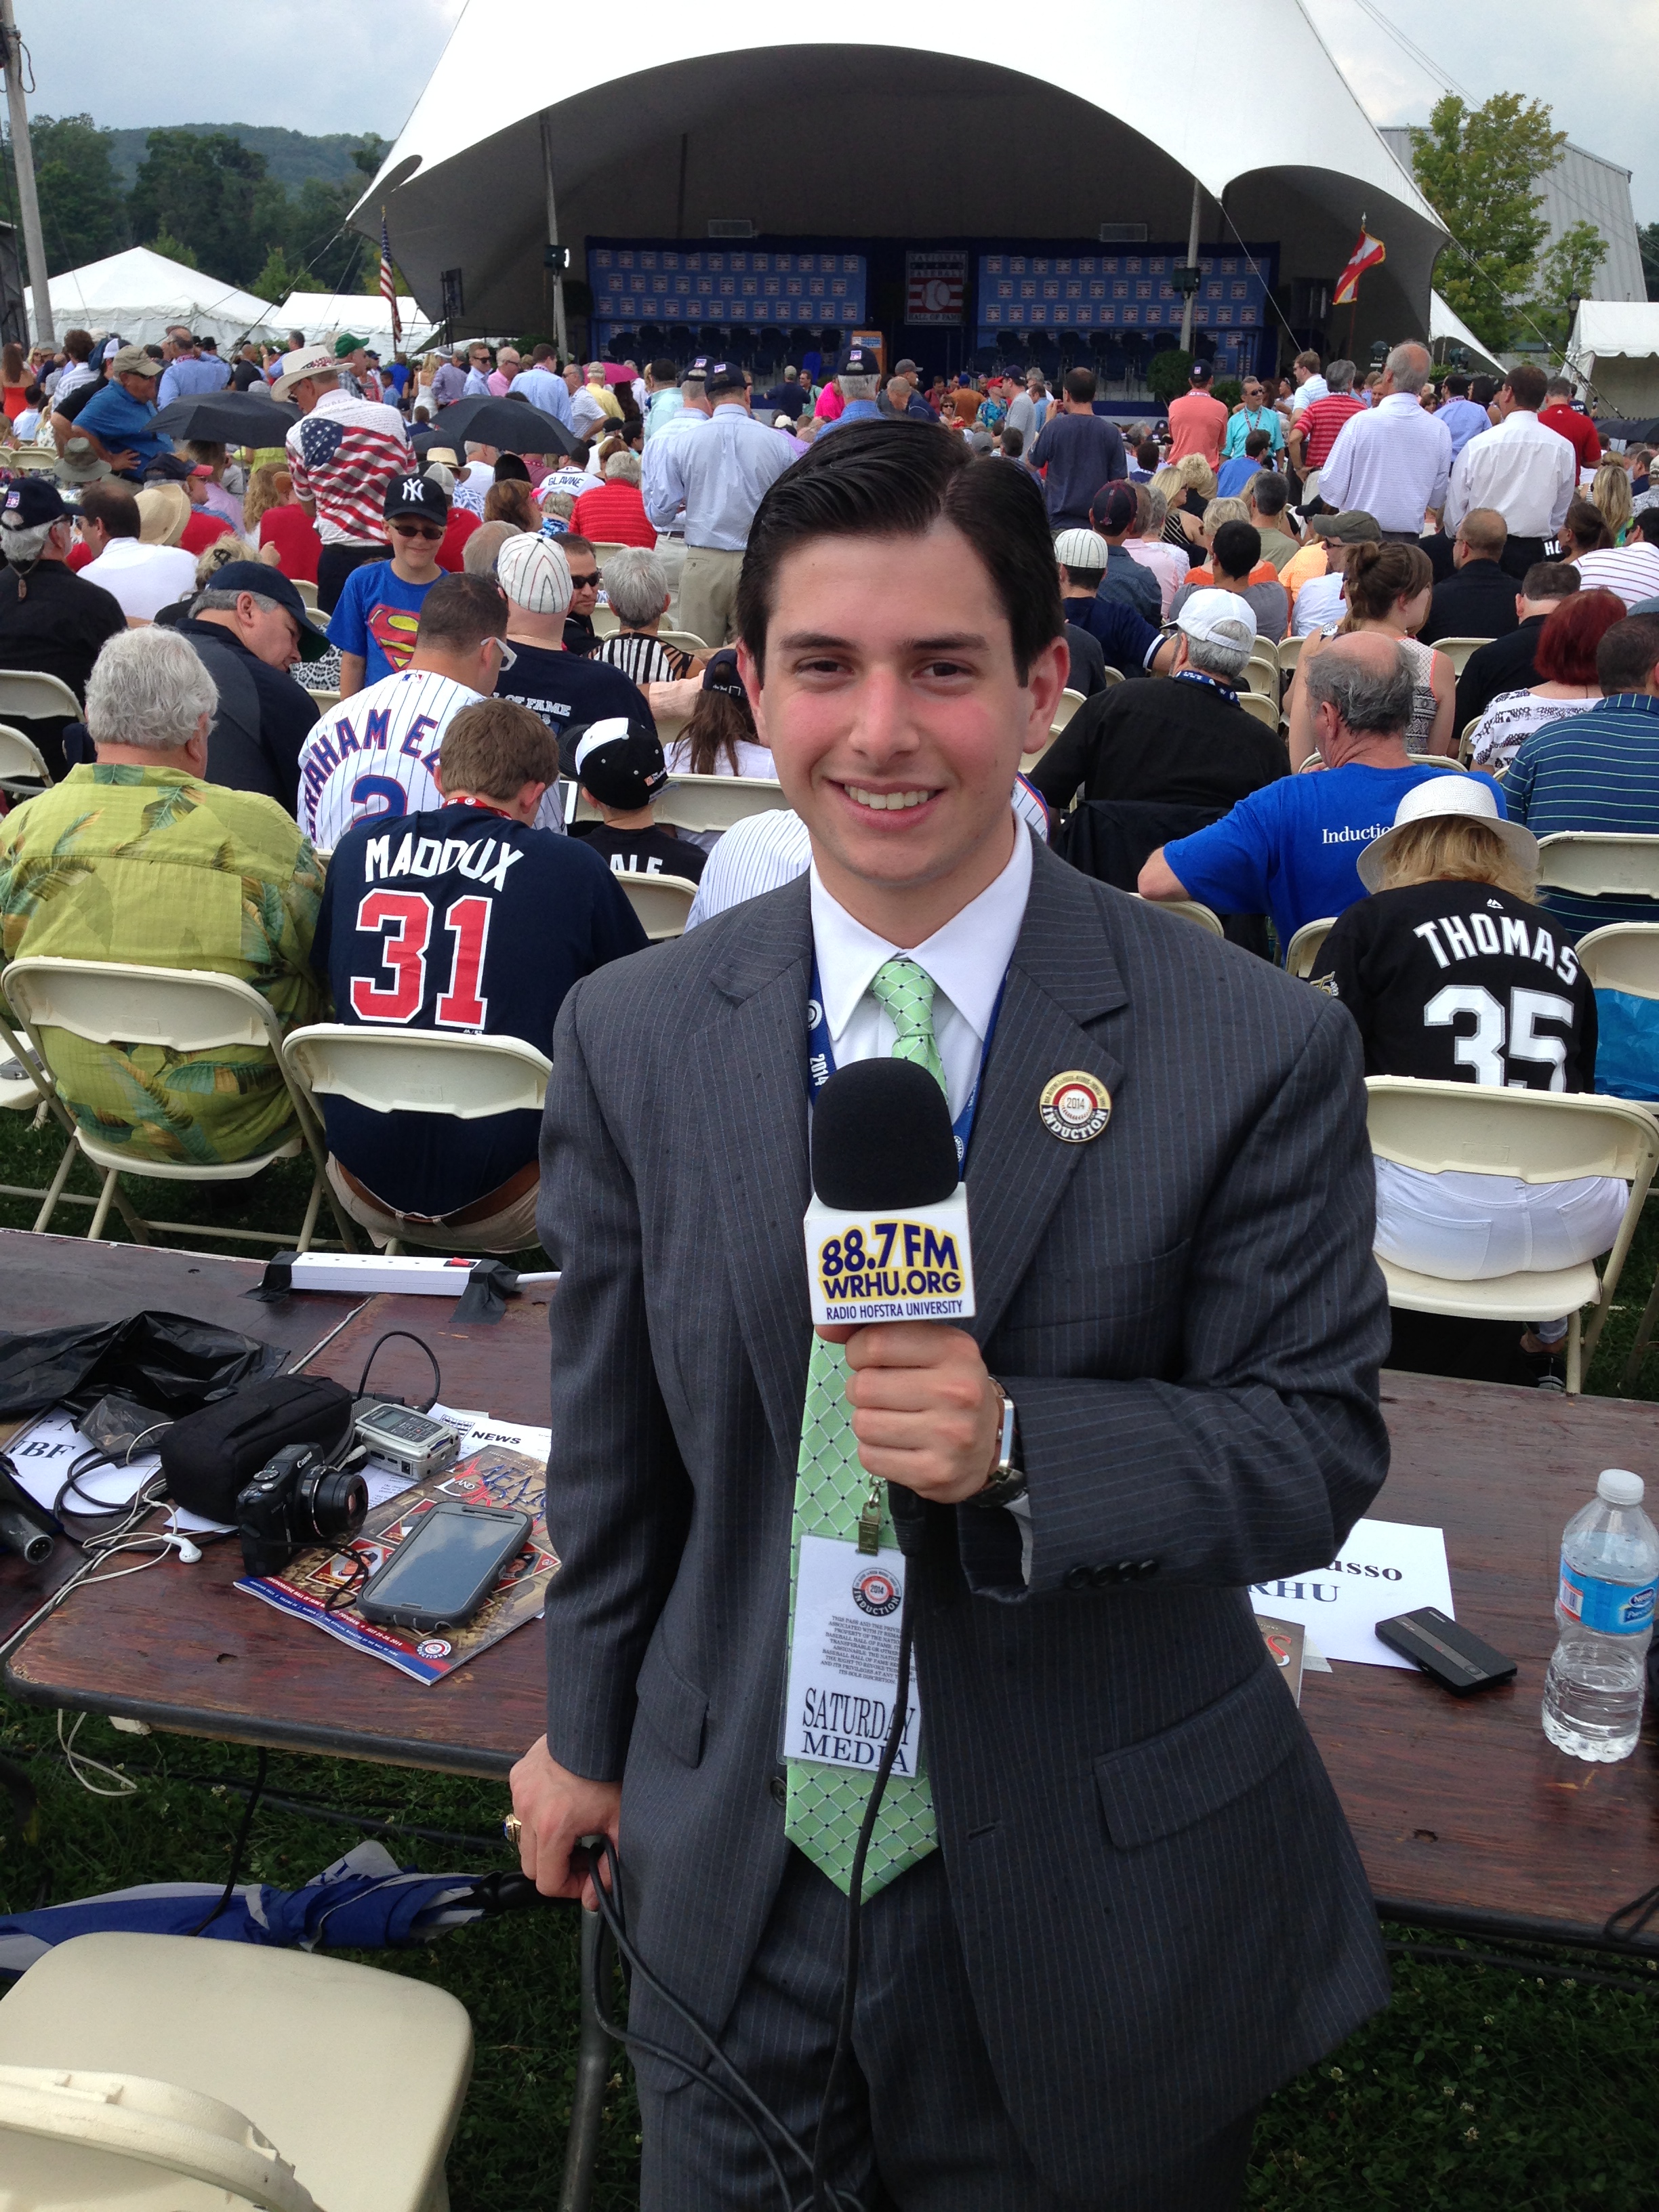 Neil A. Carousso reports from radio row at the 75th National Baseball Hall of Fame induction ceremony in Cooperstown, NY